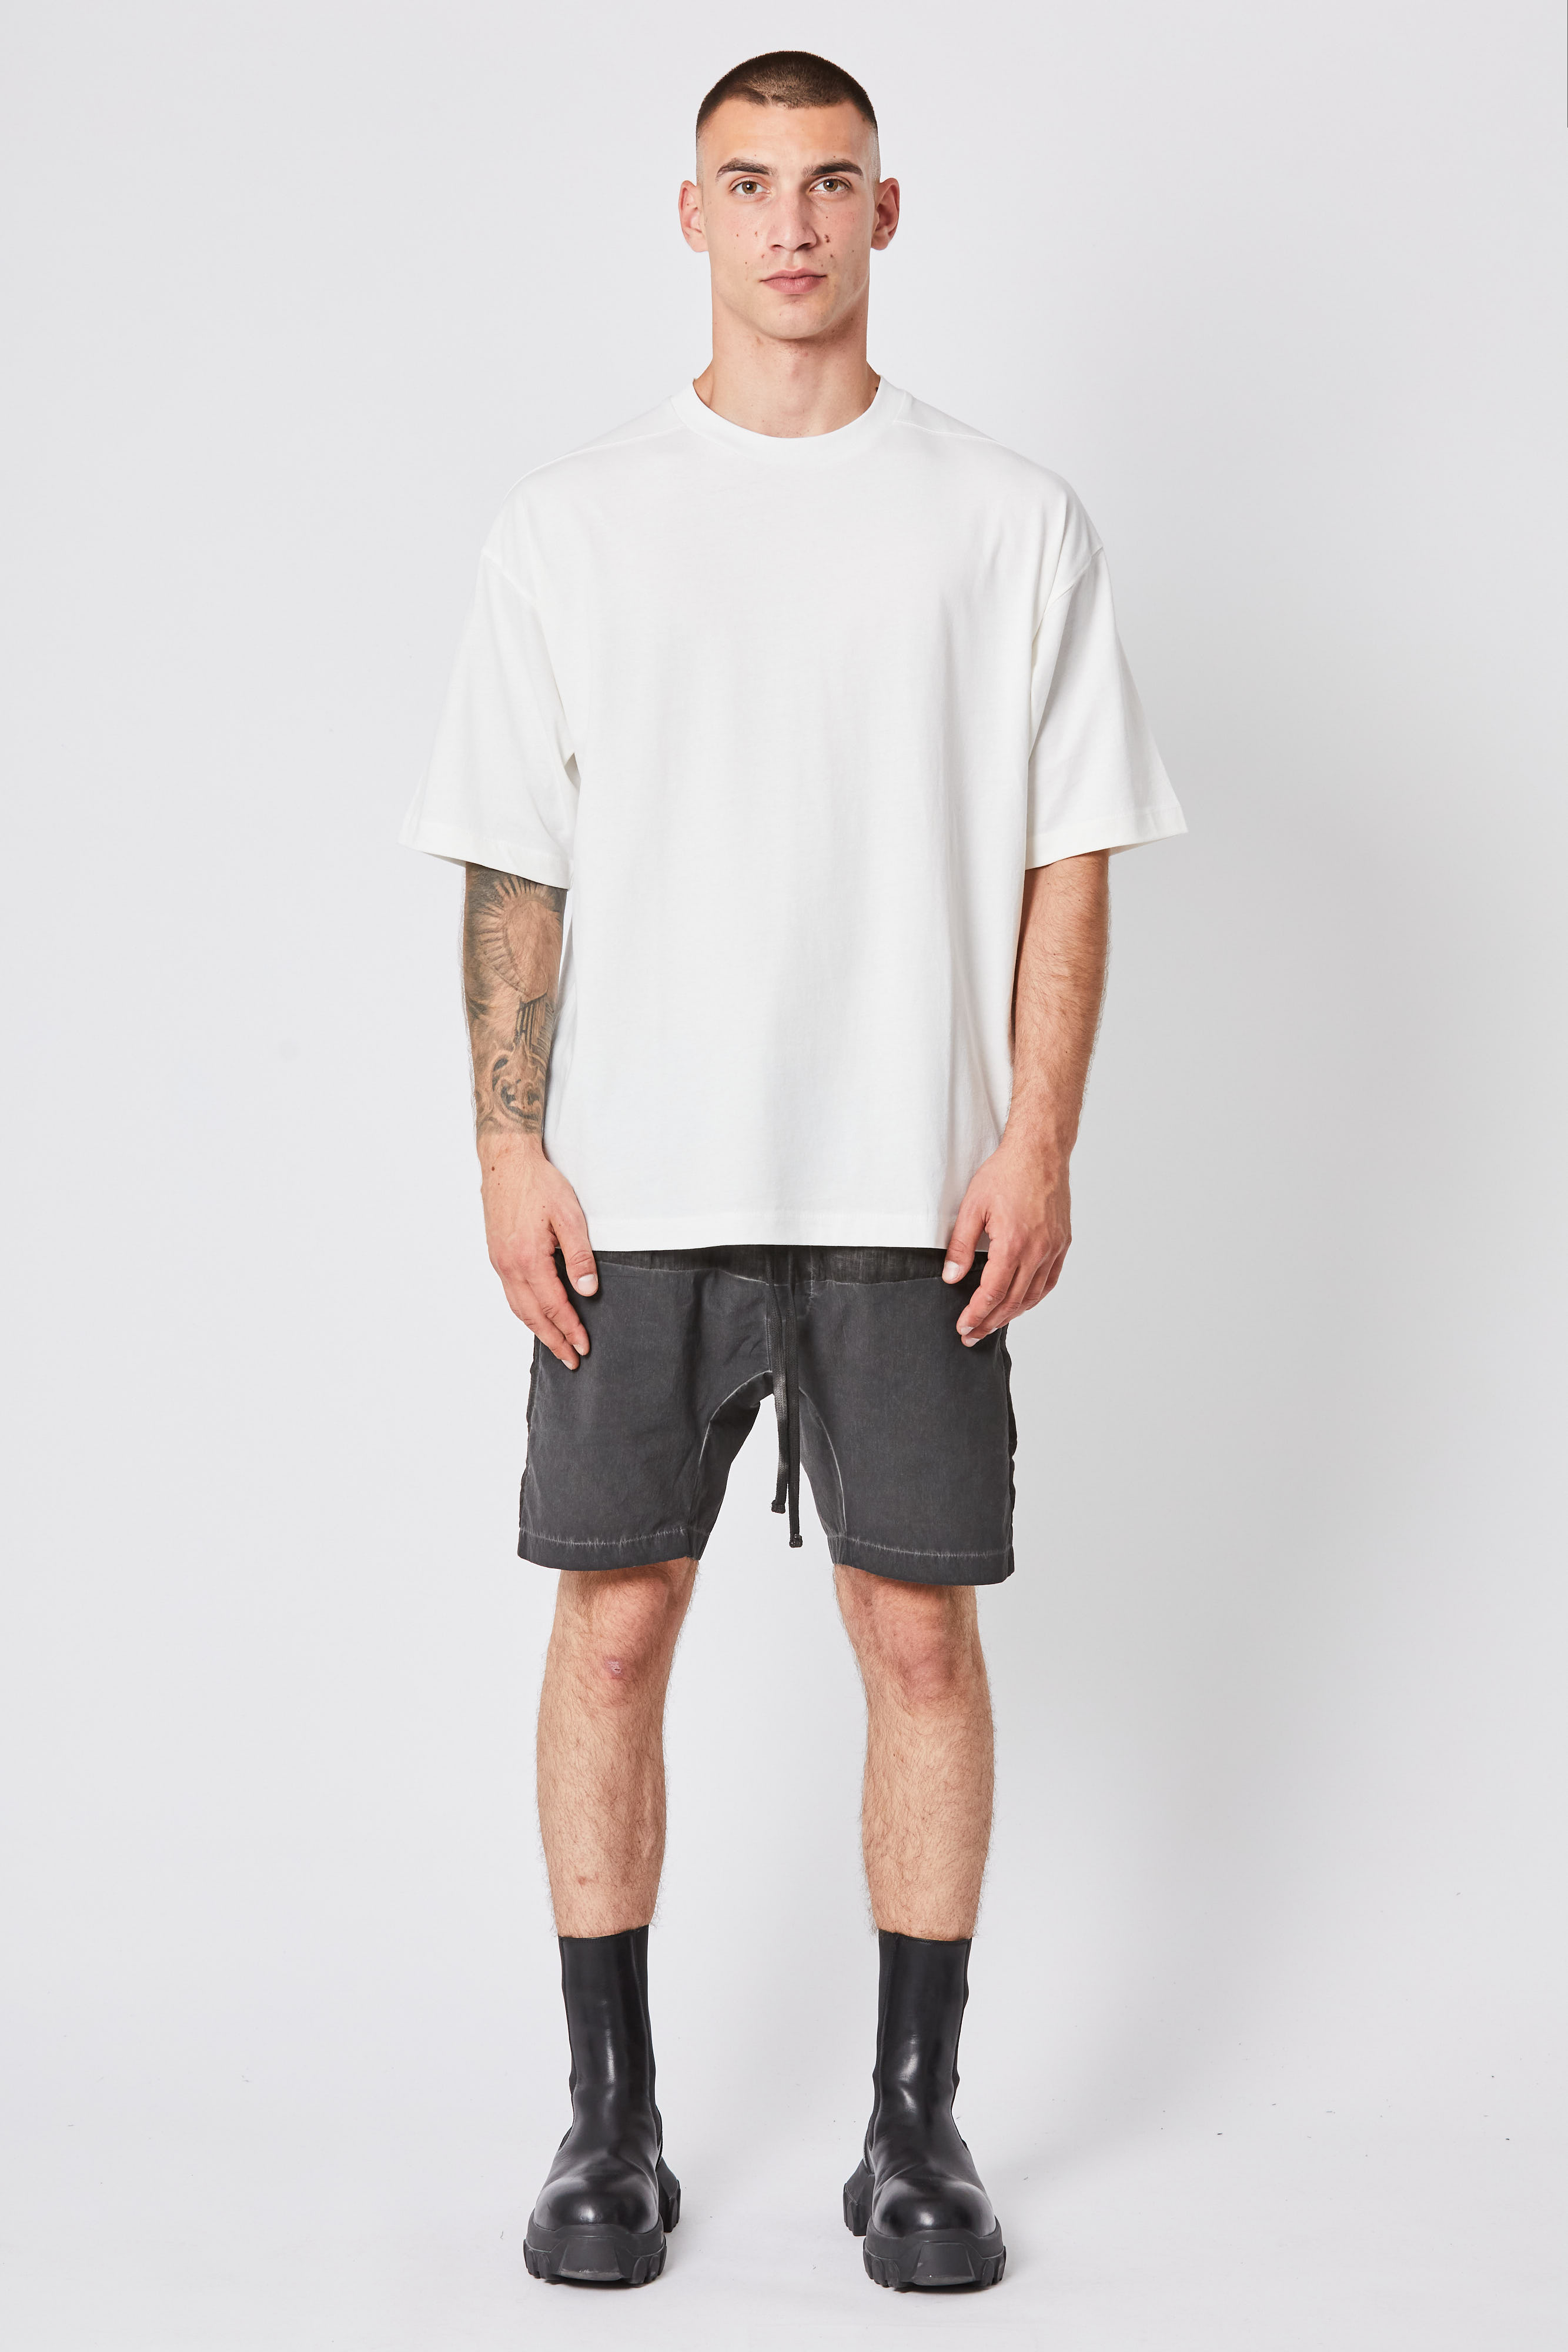 Thom Krom Oversize T-Shirt in Off White